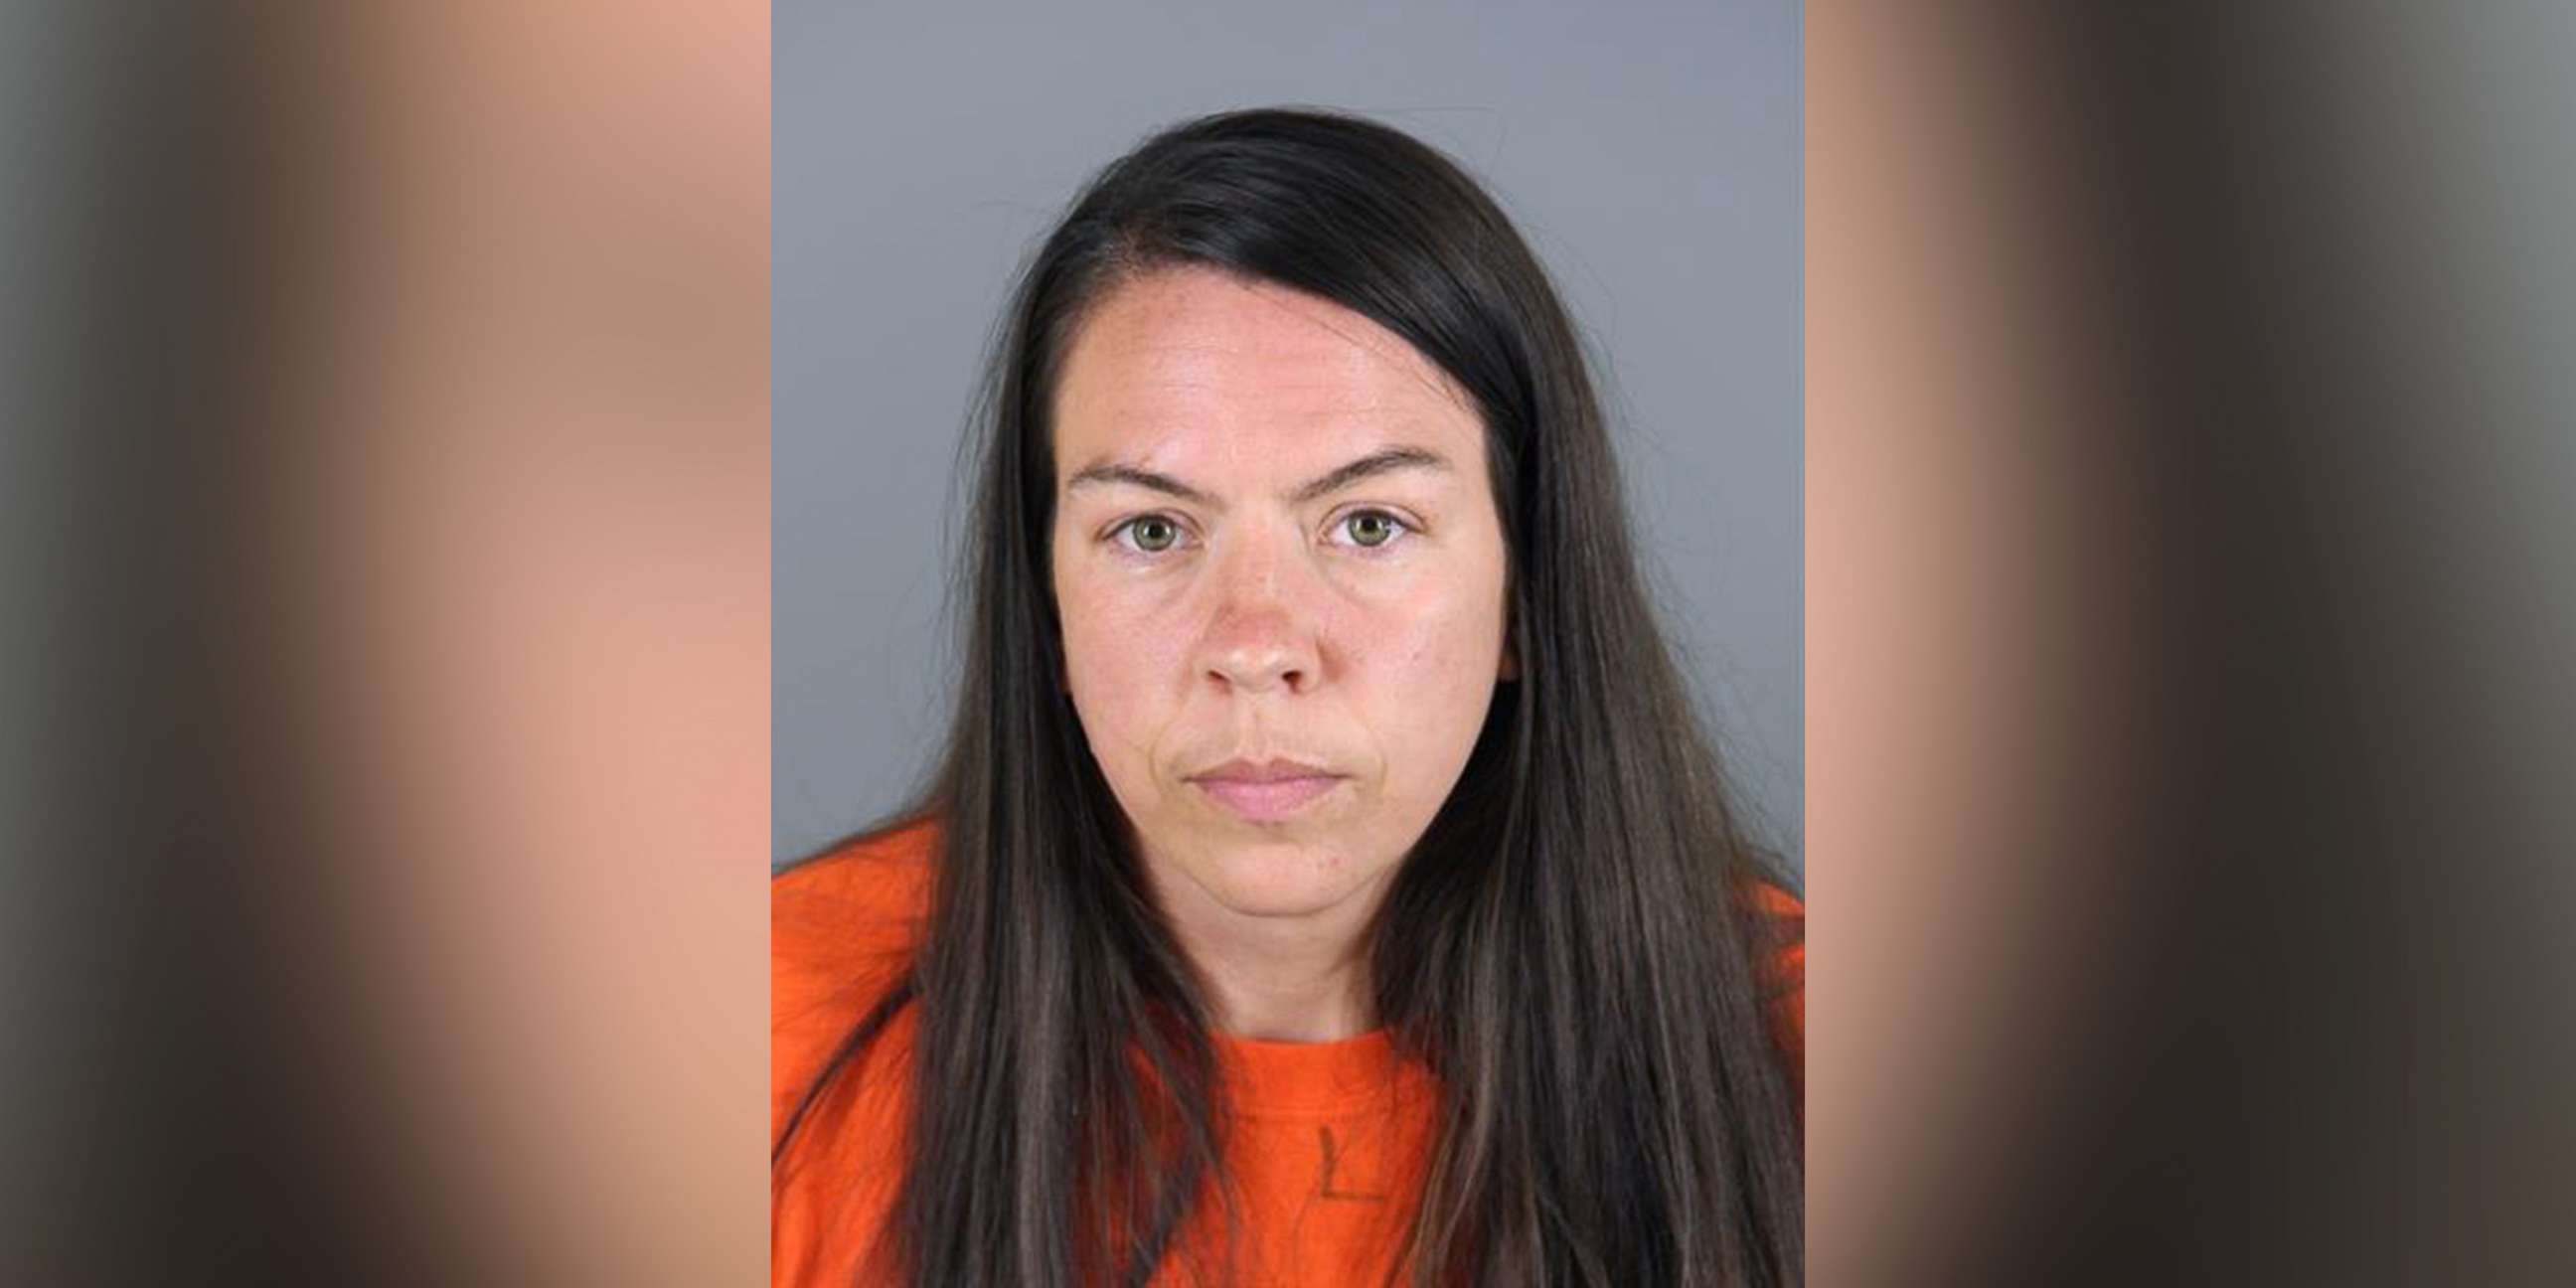 Wisconsin woman arrested, accused of murdering friend with eye drops